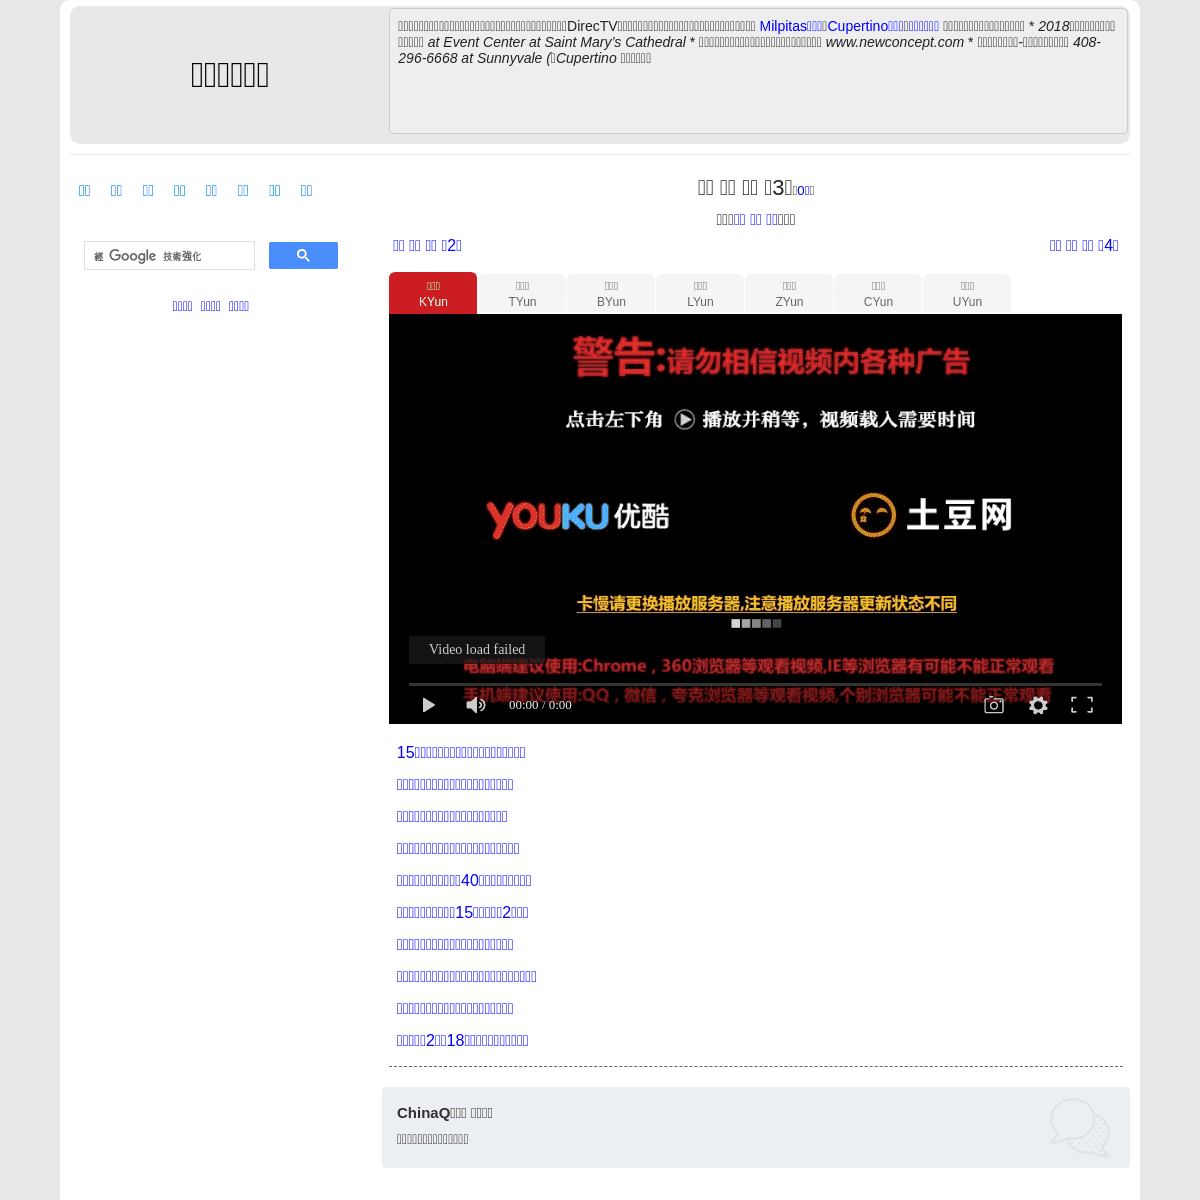 A complete backup of https://chinaq.me/jp210221/3.html